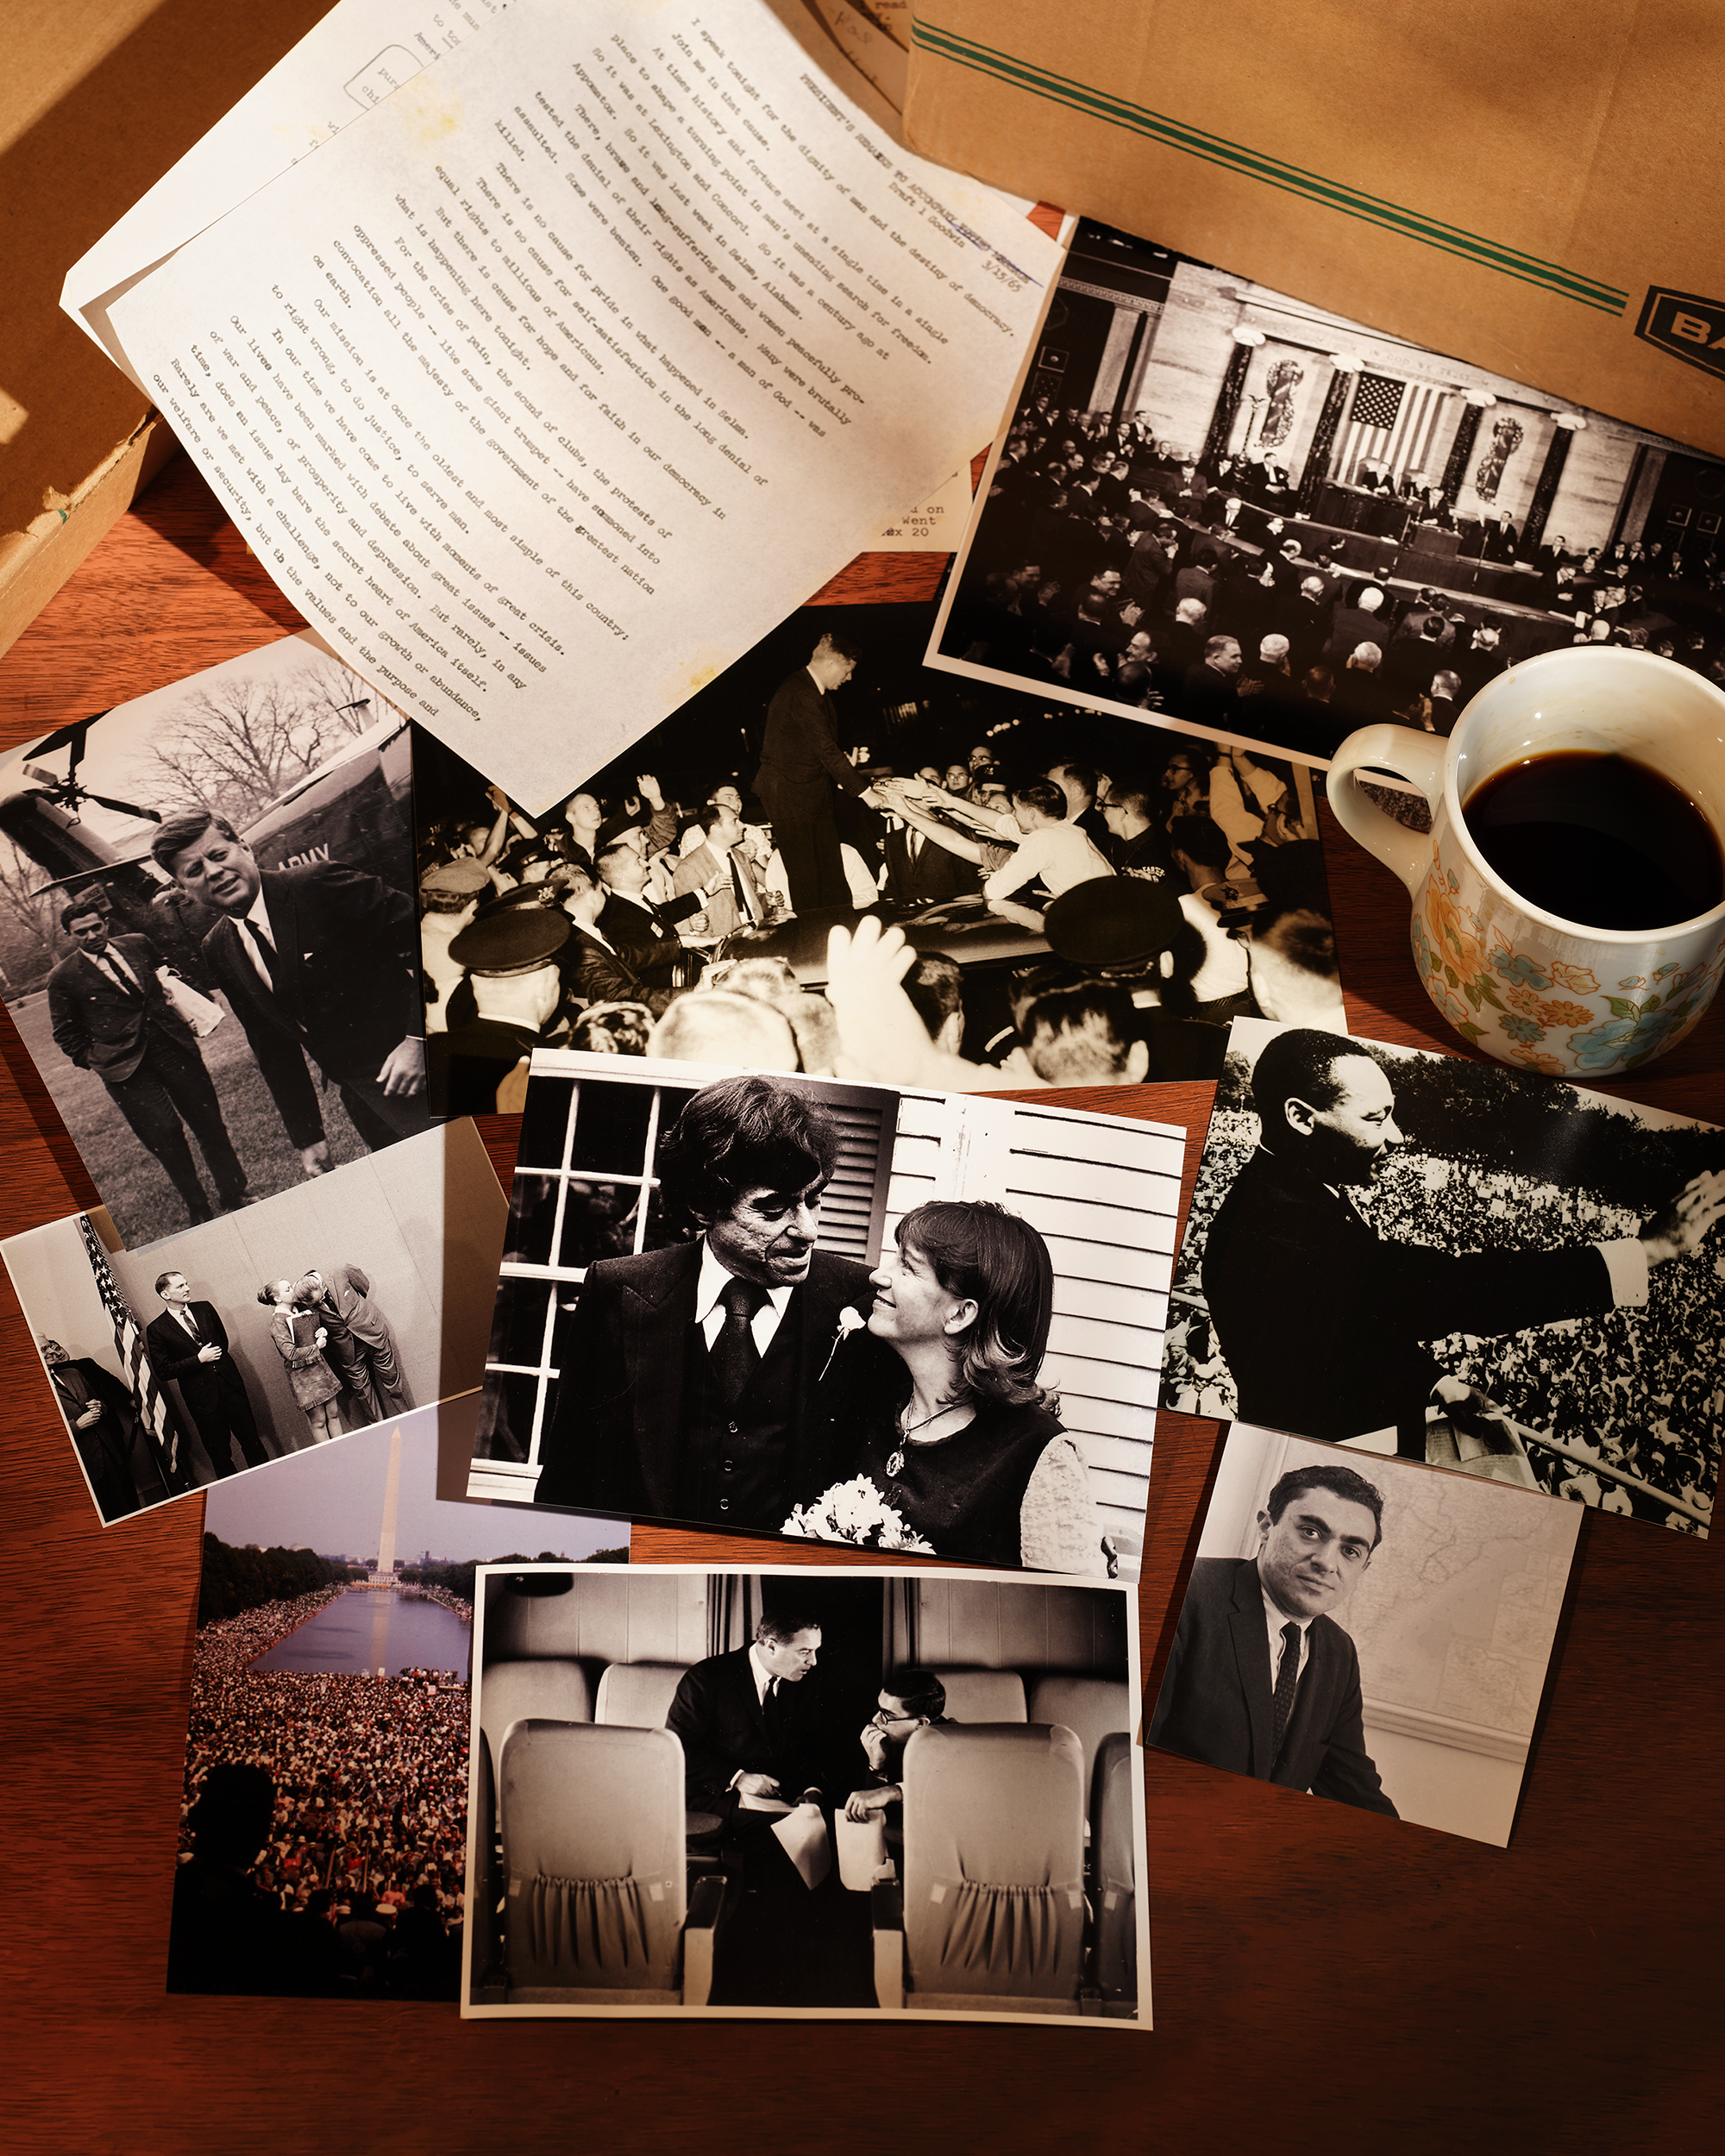 Multiple old pictures and documents next to a brown cardboard box and a cup of coffee